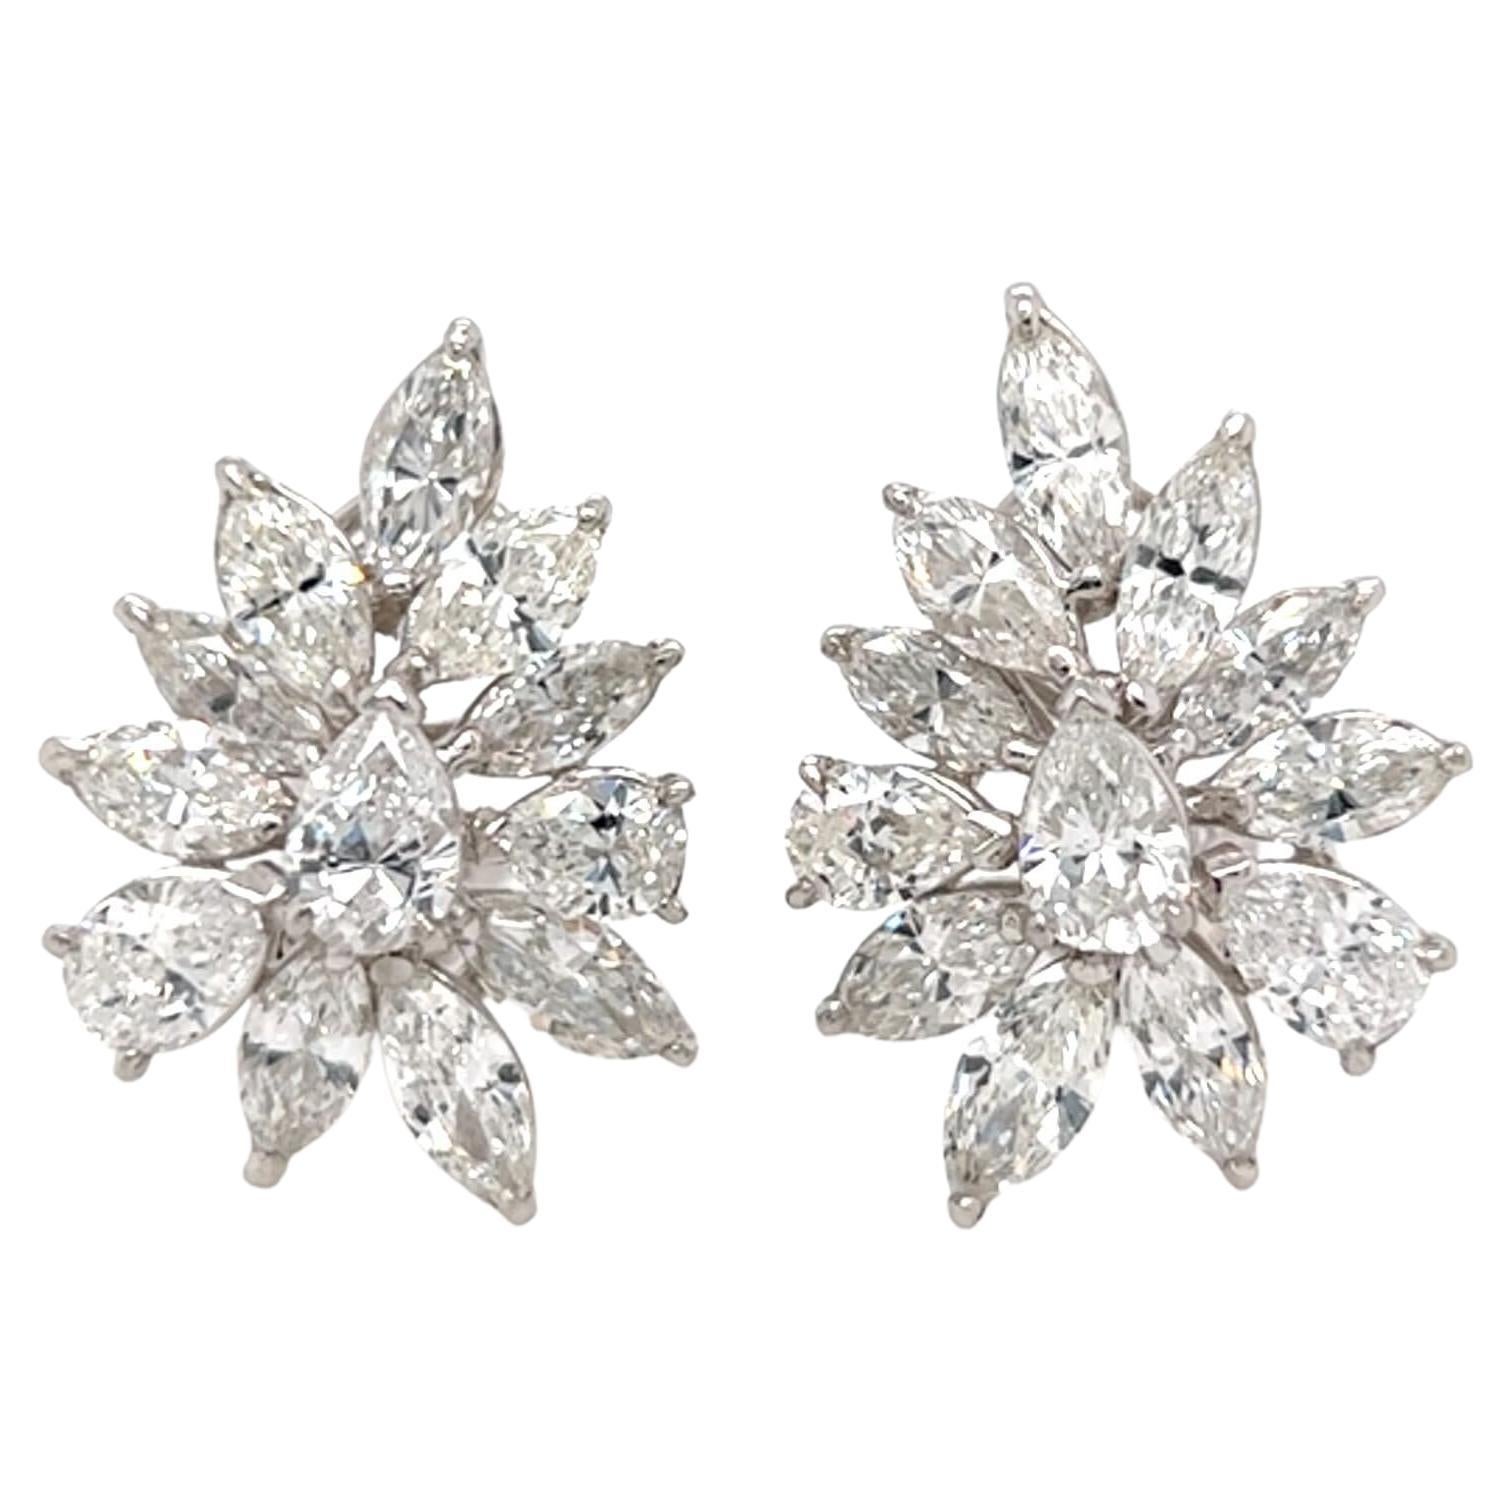 Pair of Yellow Gold, Platinum and Diamond Earrings For Sale at 1stDibs